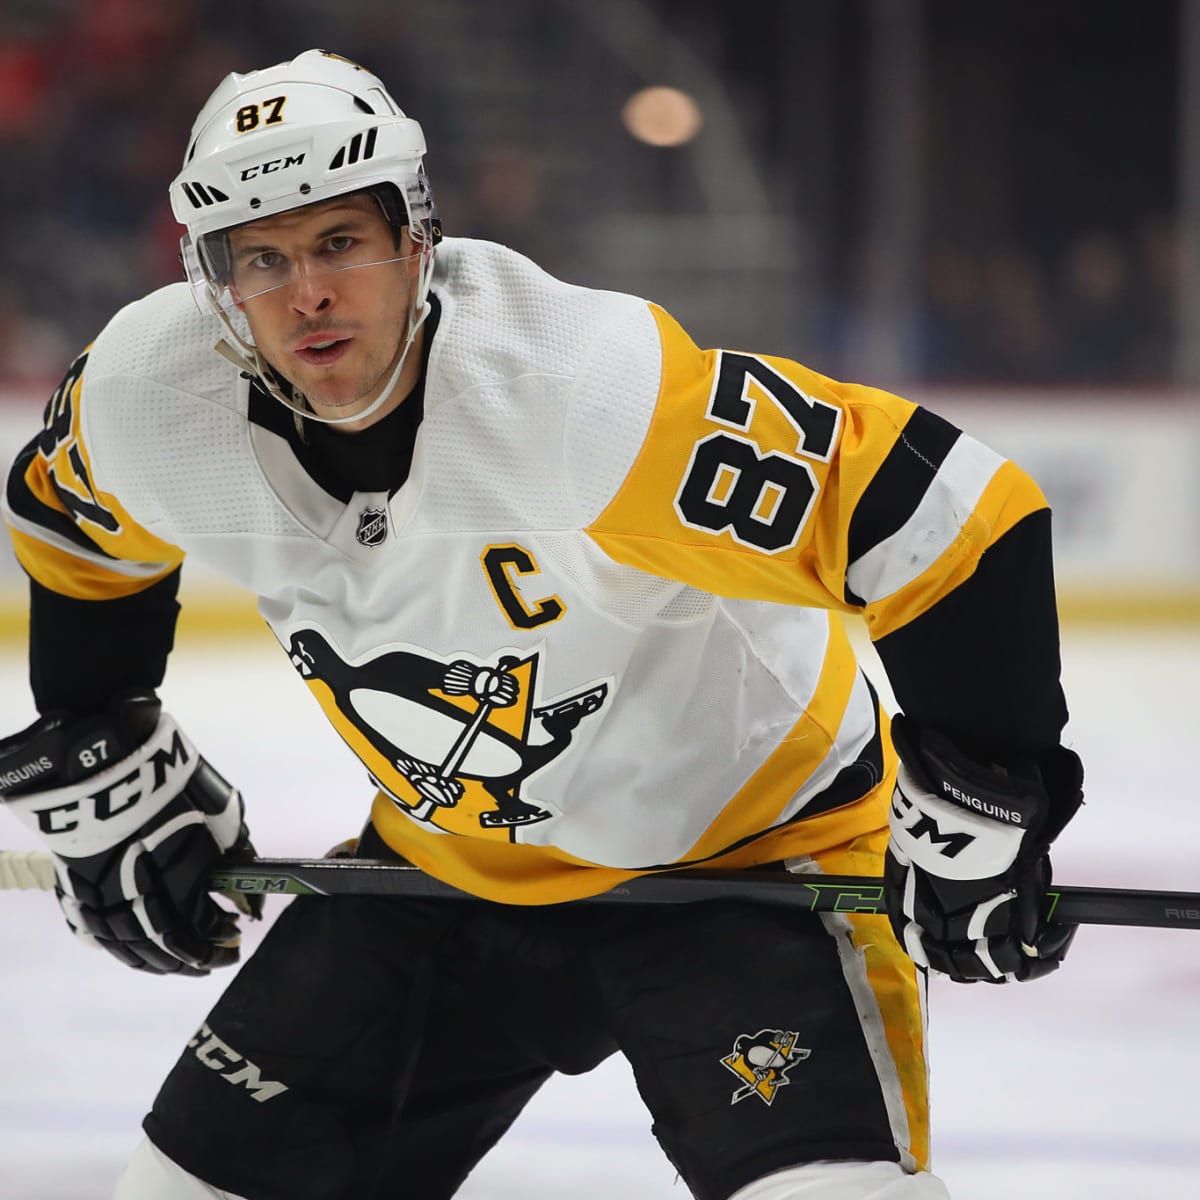 Pegnuins' Sidney Crosby, Tristan Jarry expected to play Game 7 vs. Rangers